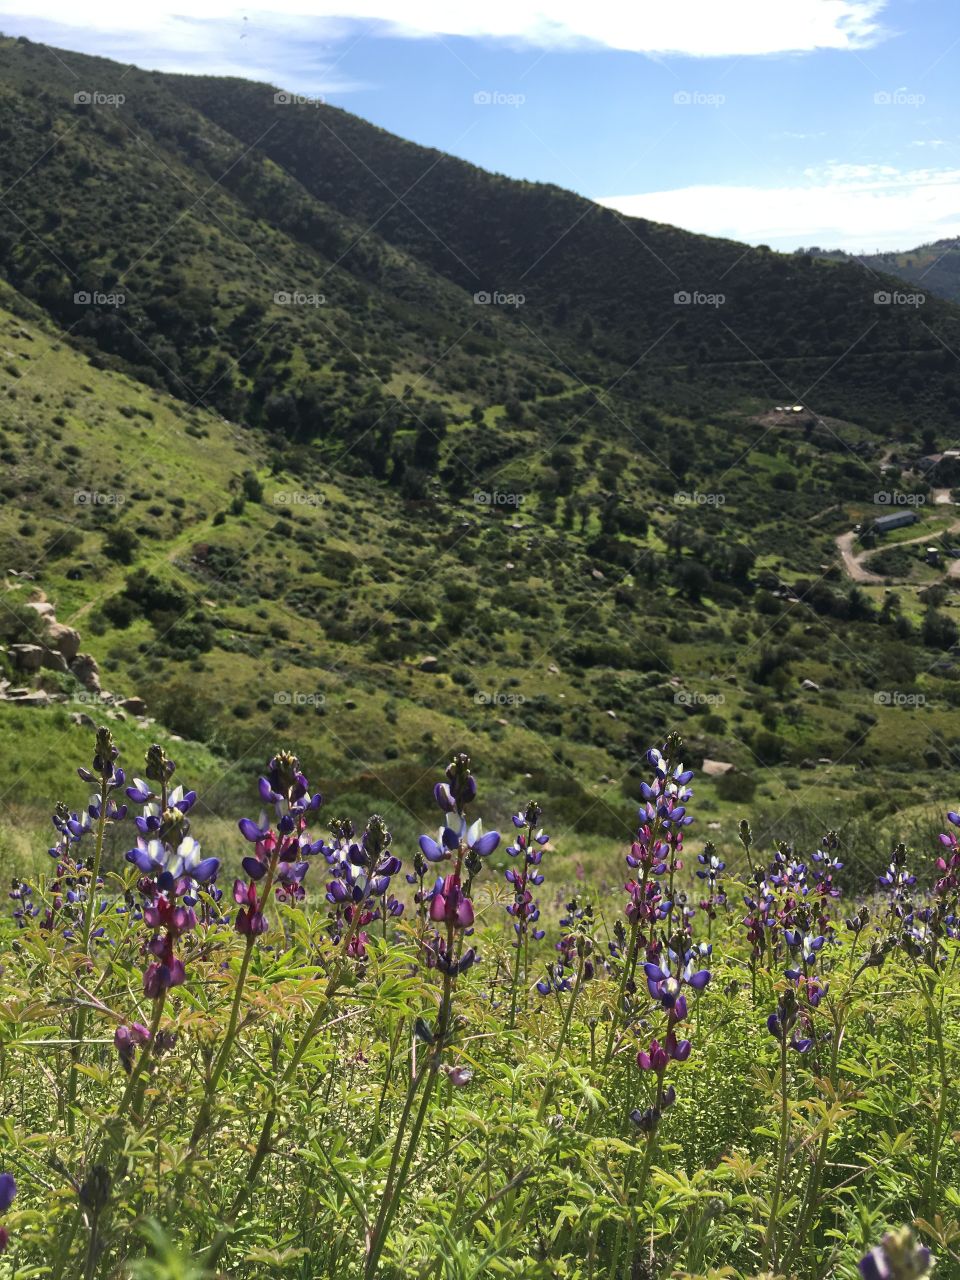 Springtime and wild flowers in El Monte County Park in San Diego